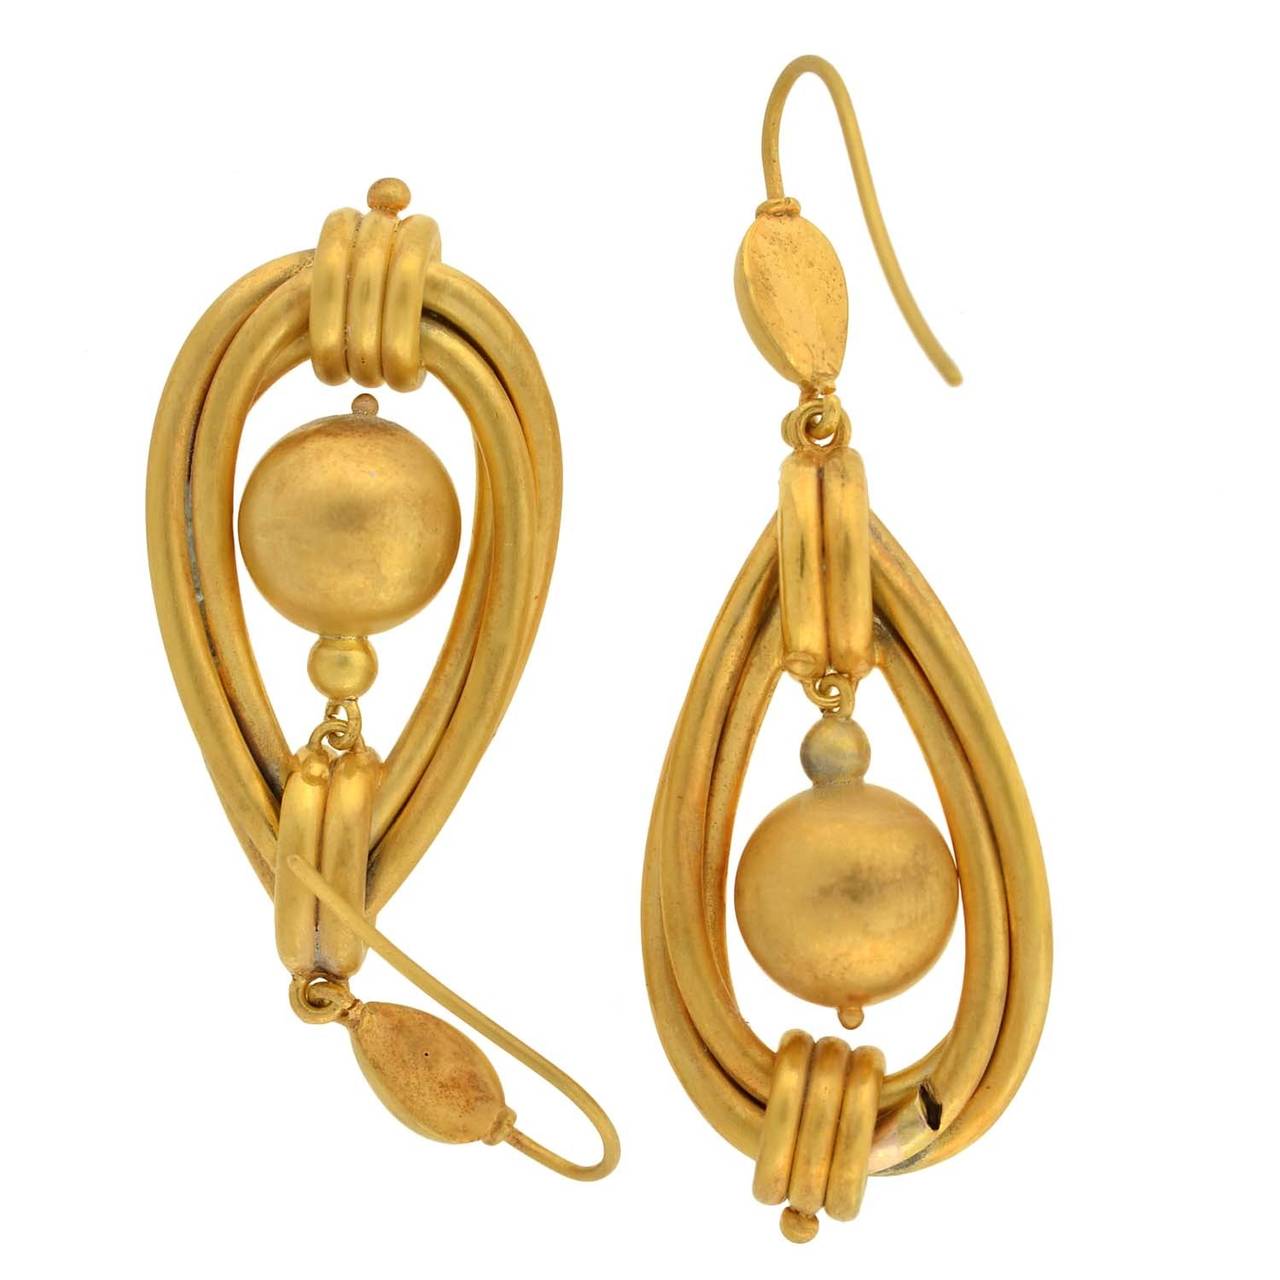 Women's Victorian Twisted Gold Hoop and Ball Earrings